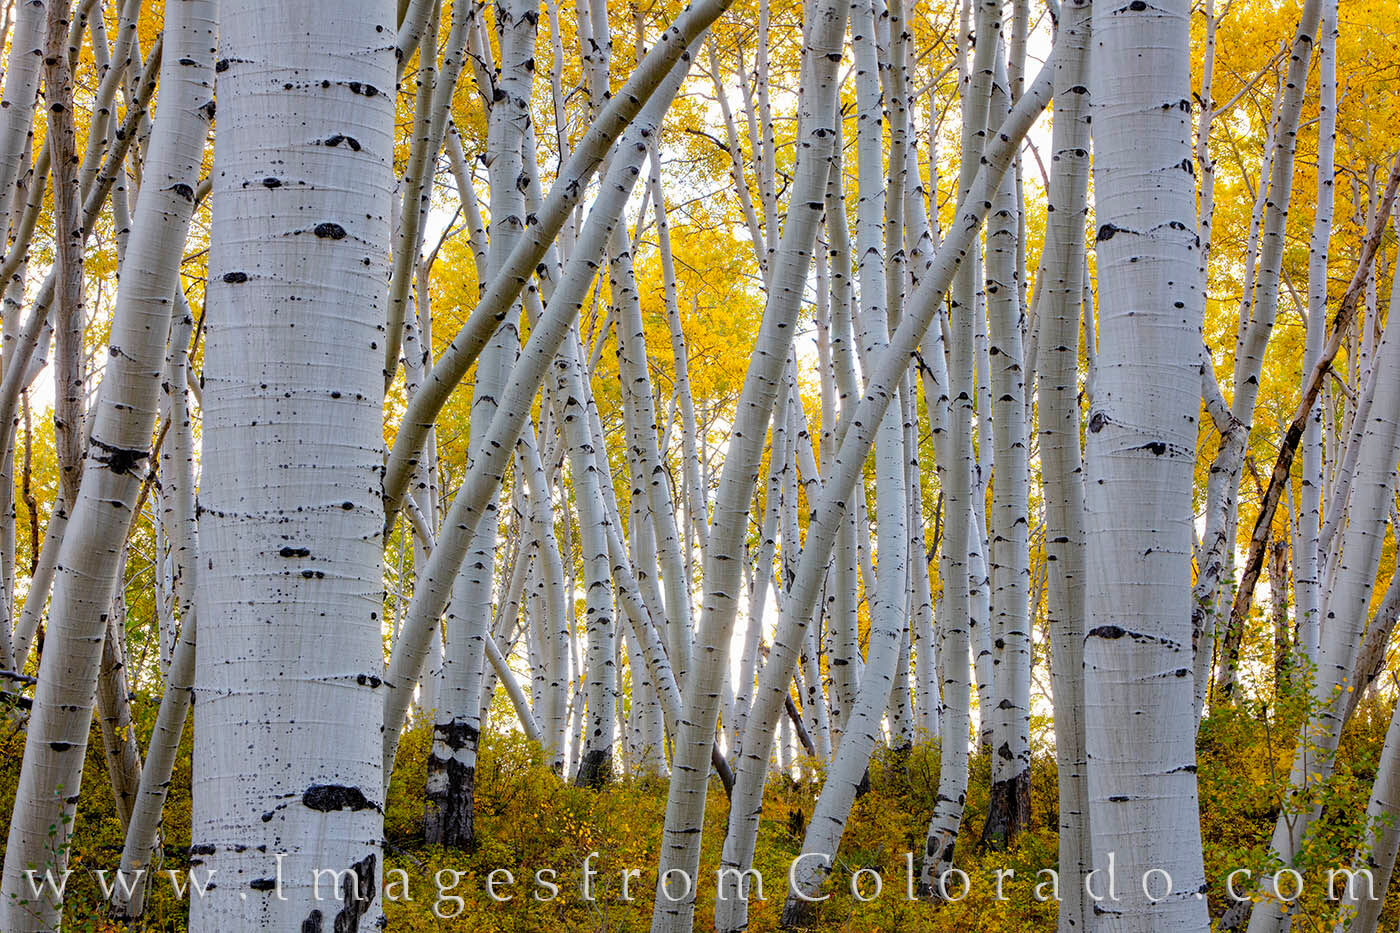 One of the few places in Colorado to photograph aspen trees that have grown in different directions is Last Dollar Road between...